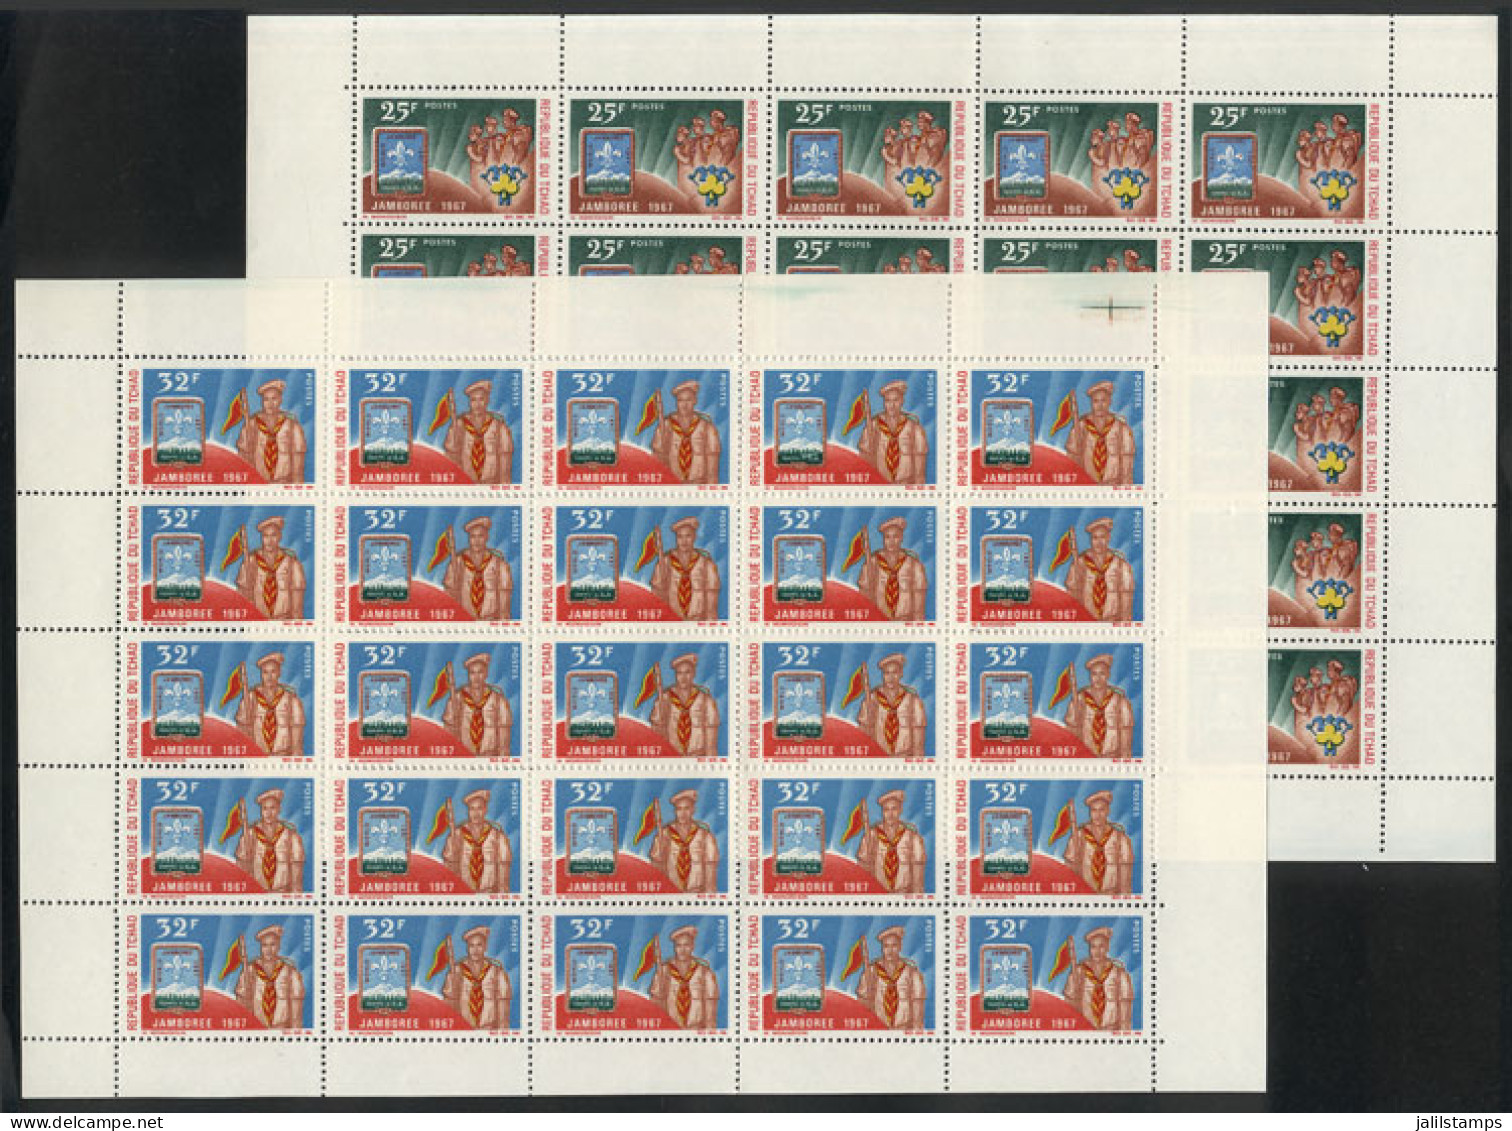 CHAD: Sc.144/145, 1967 Scouts, Cmpl. Set Of 2 Values In Sheets Of 25, MNH, VF Quality! - Tchad (1960-...)